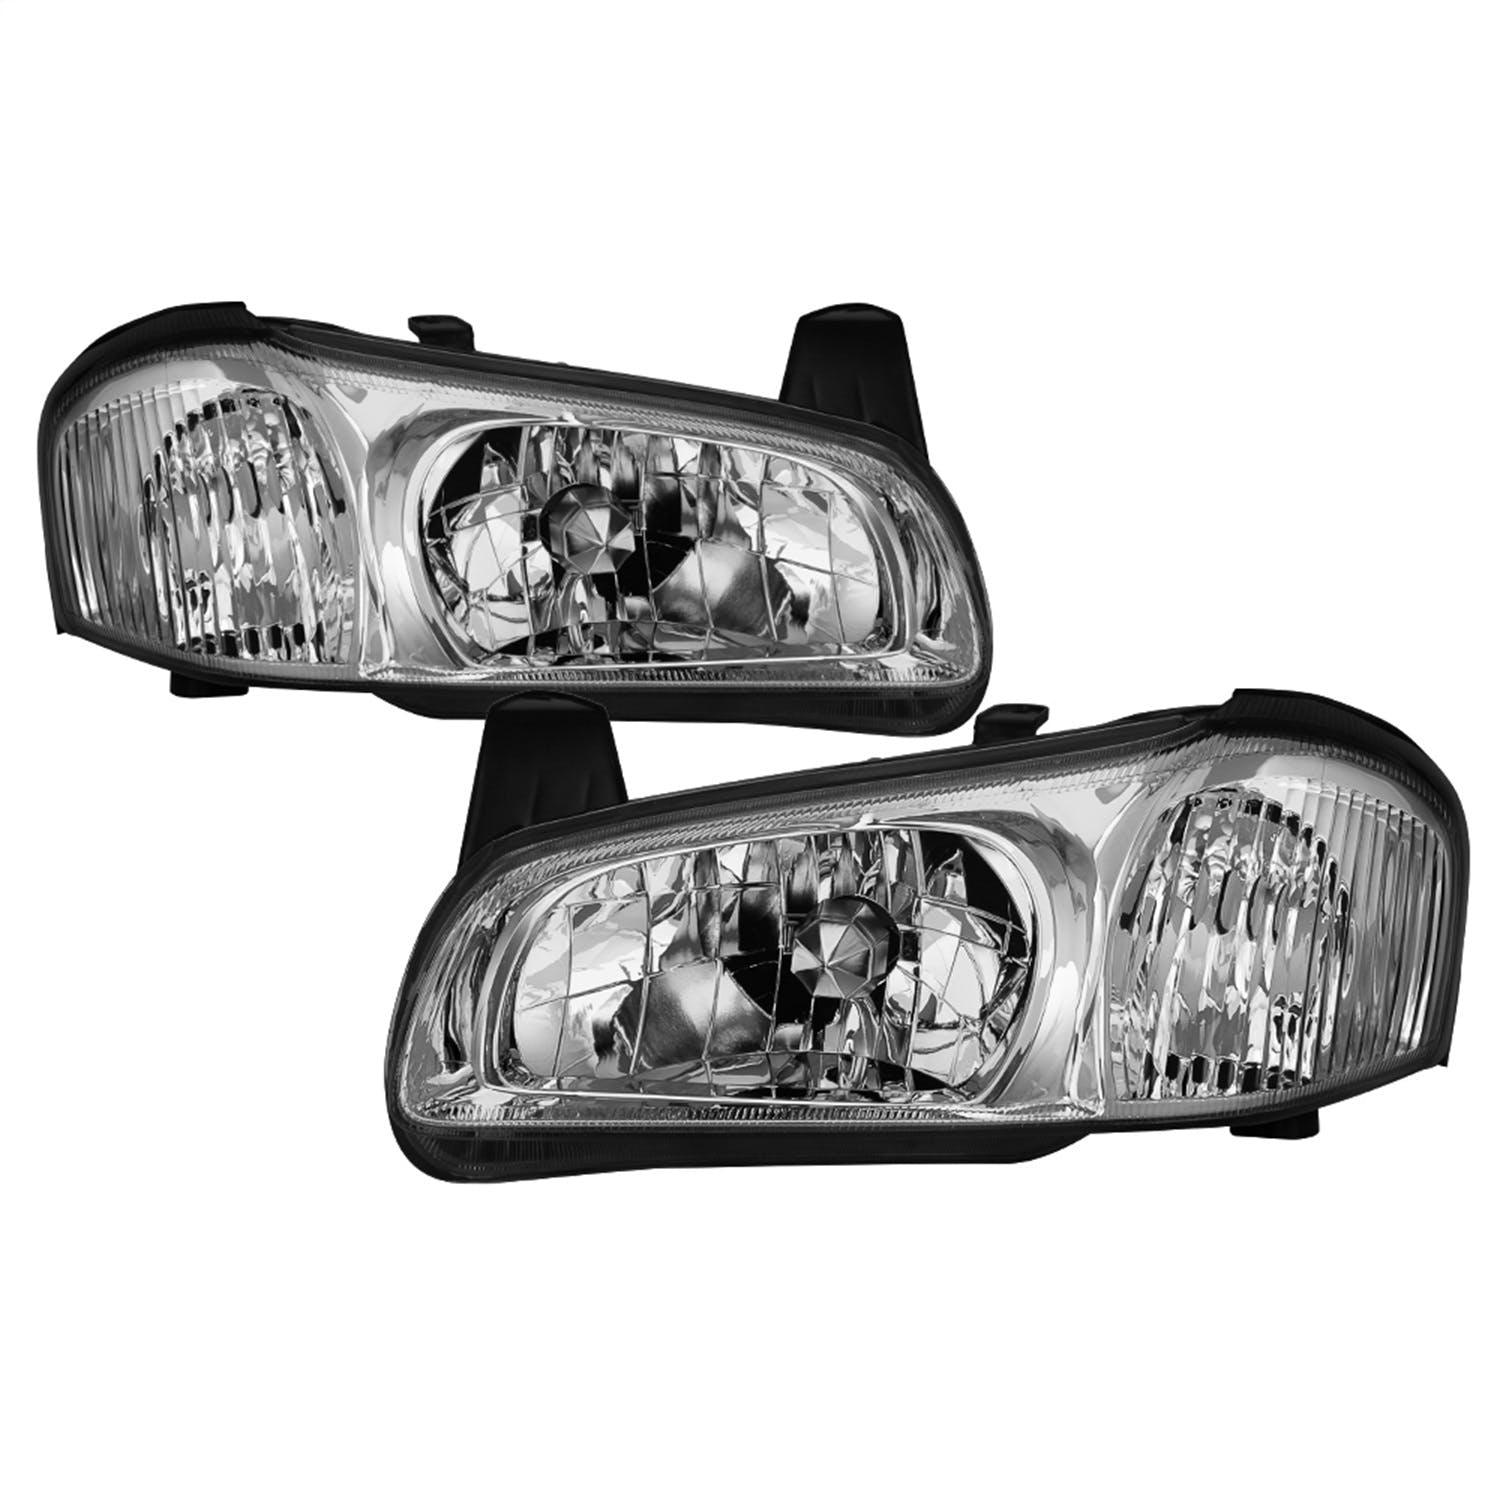 XTUNE POWER 9042799 Nissan Maxima 00 01 ( Does Not Fit 20th Anniversary Edition ) OEM Style Headlights Chrome